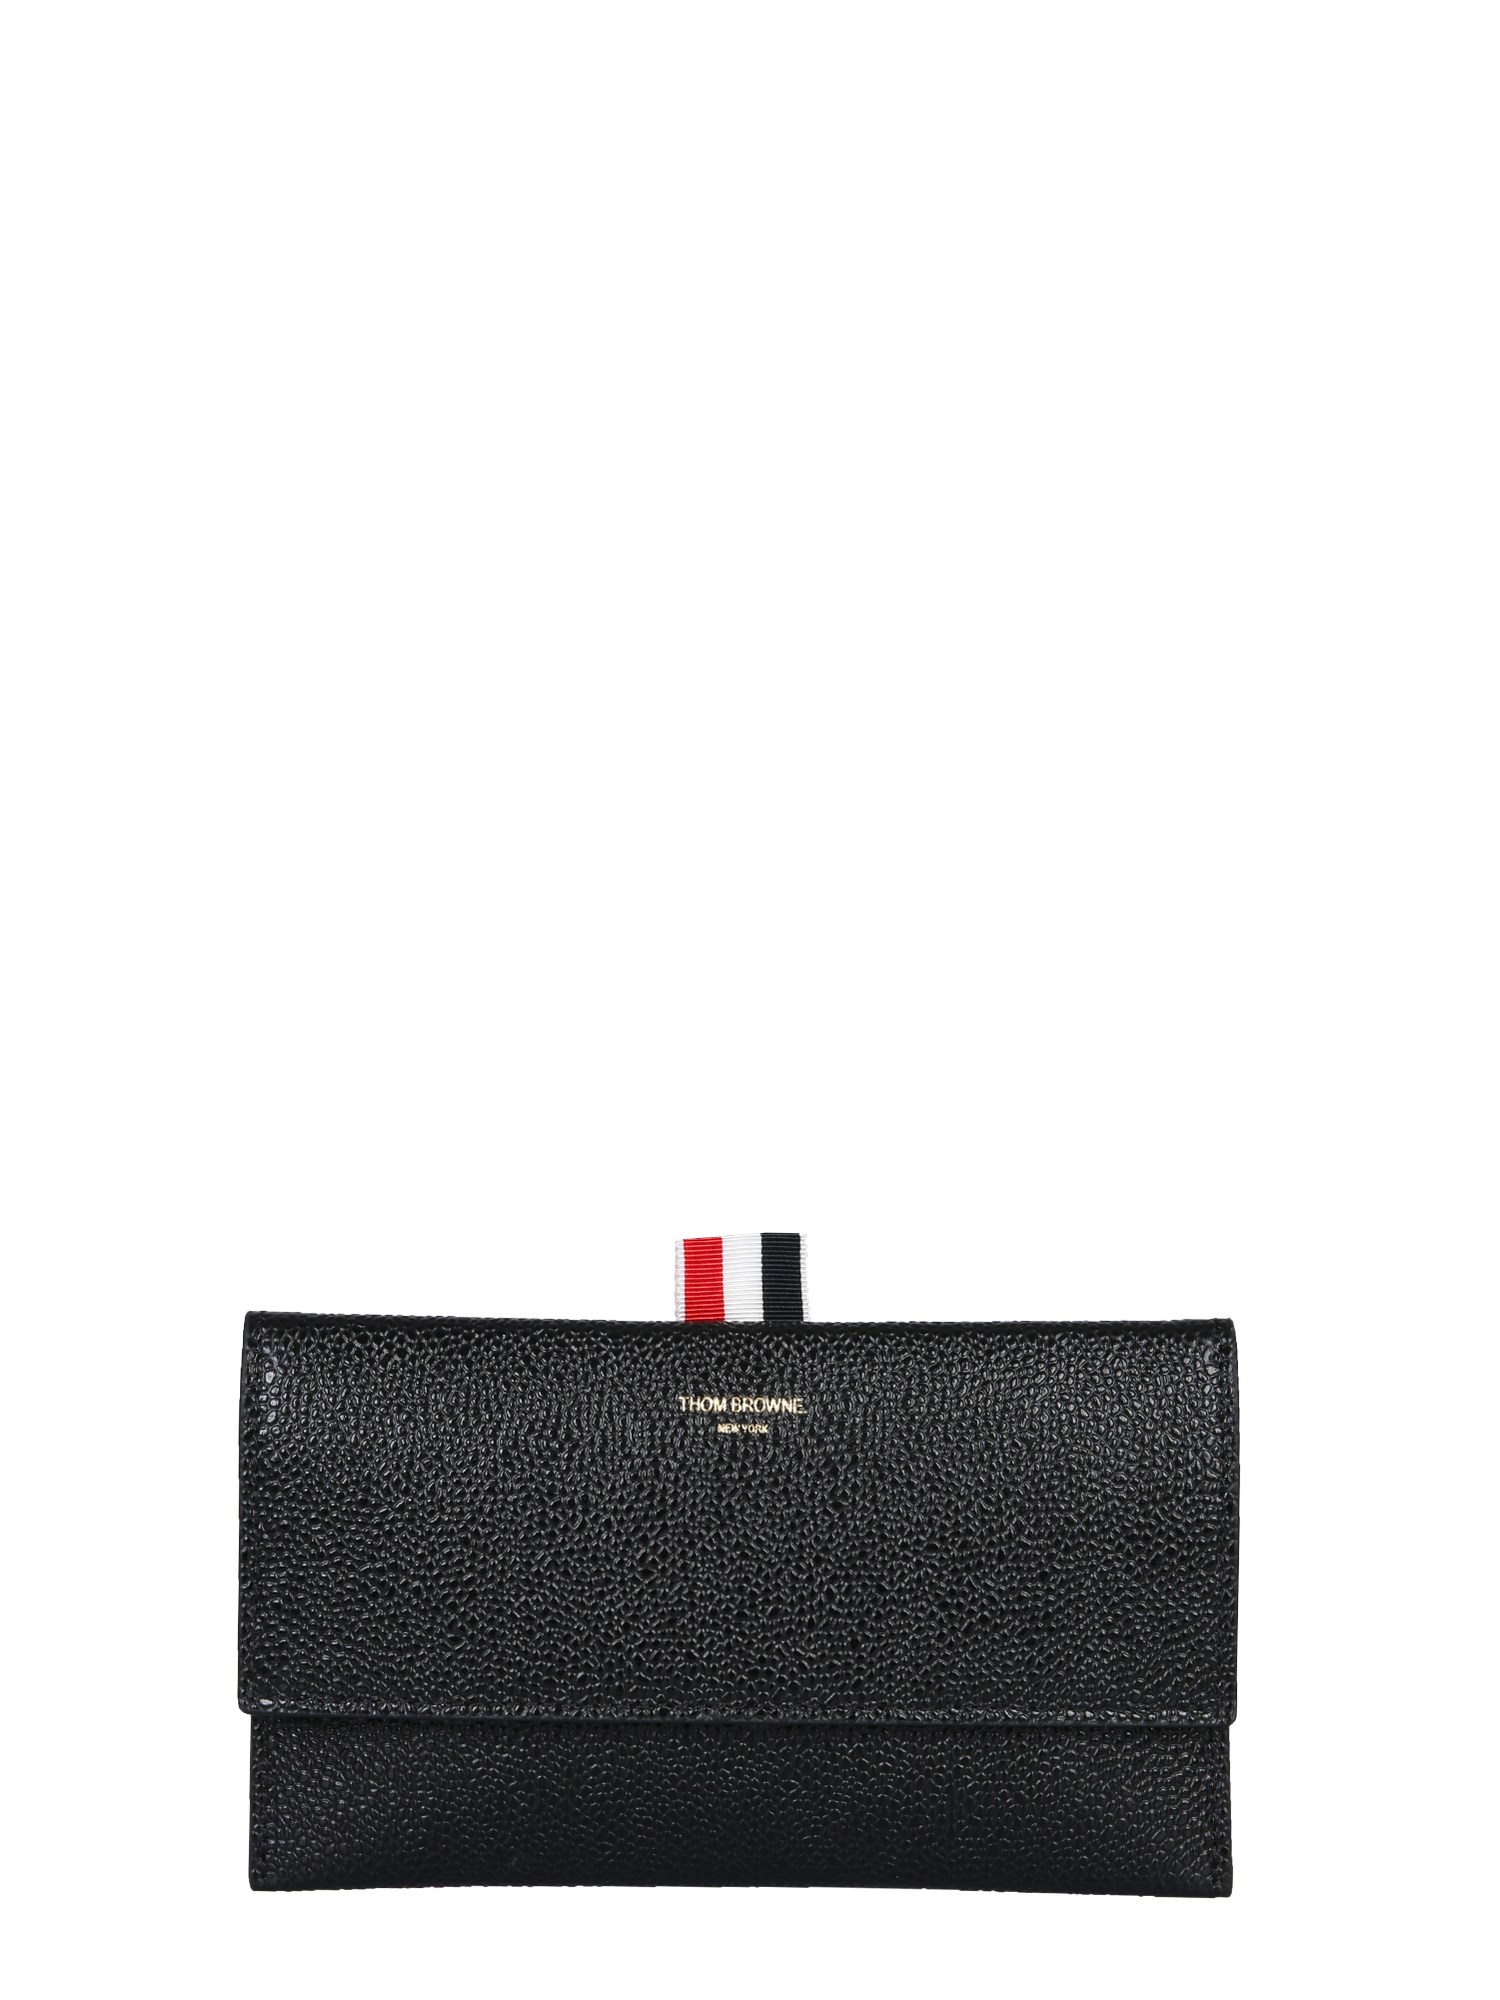 Thom Browne WALLET WITH FLAP